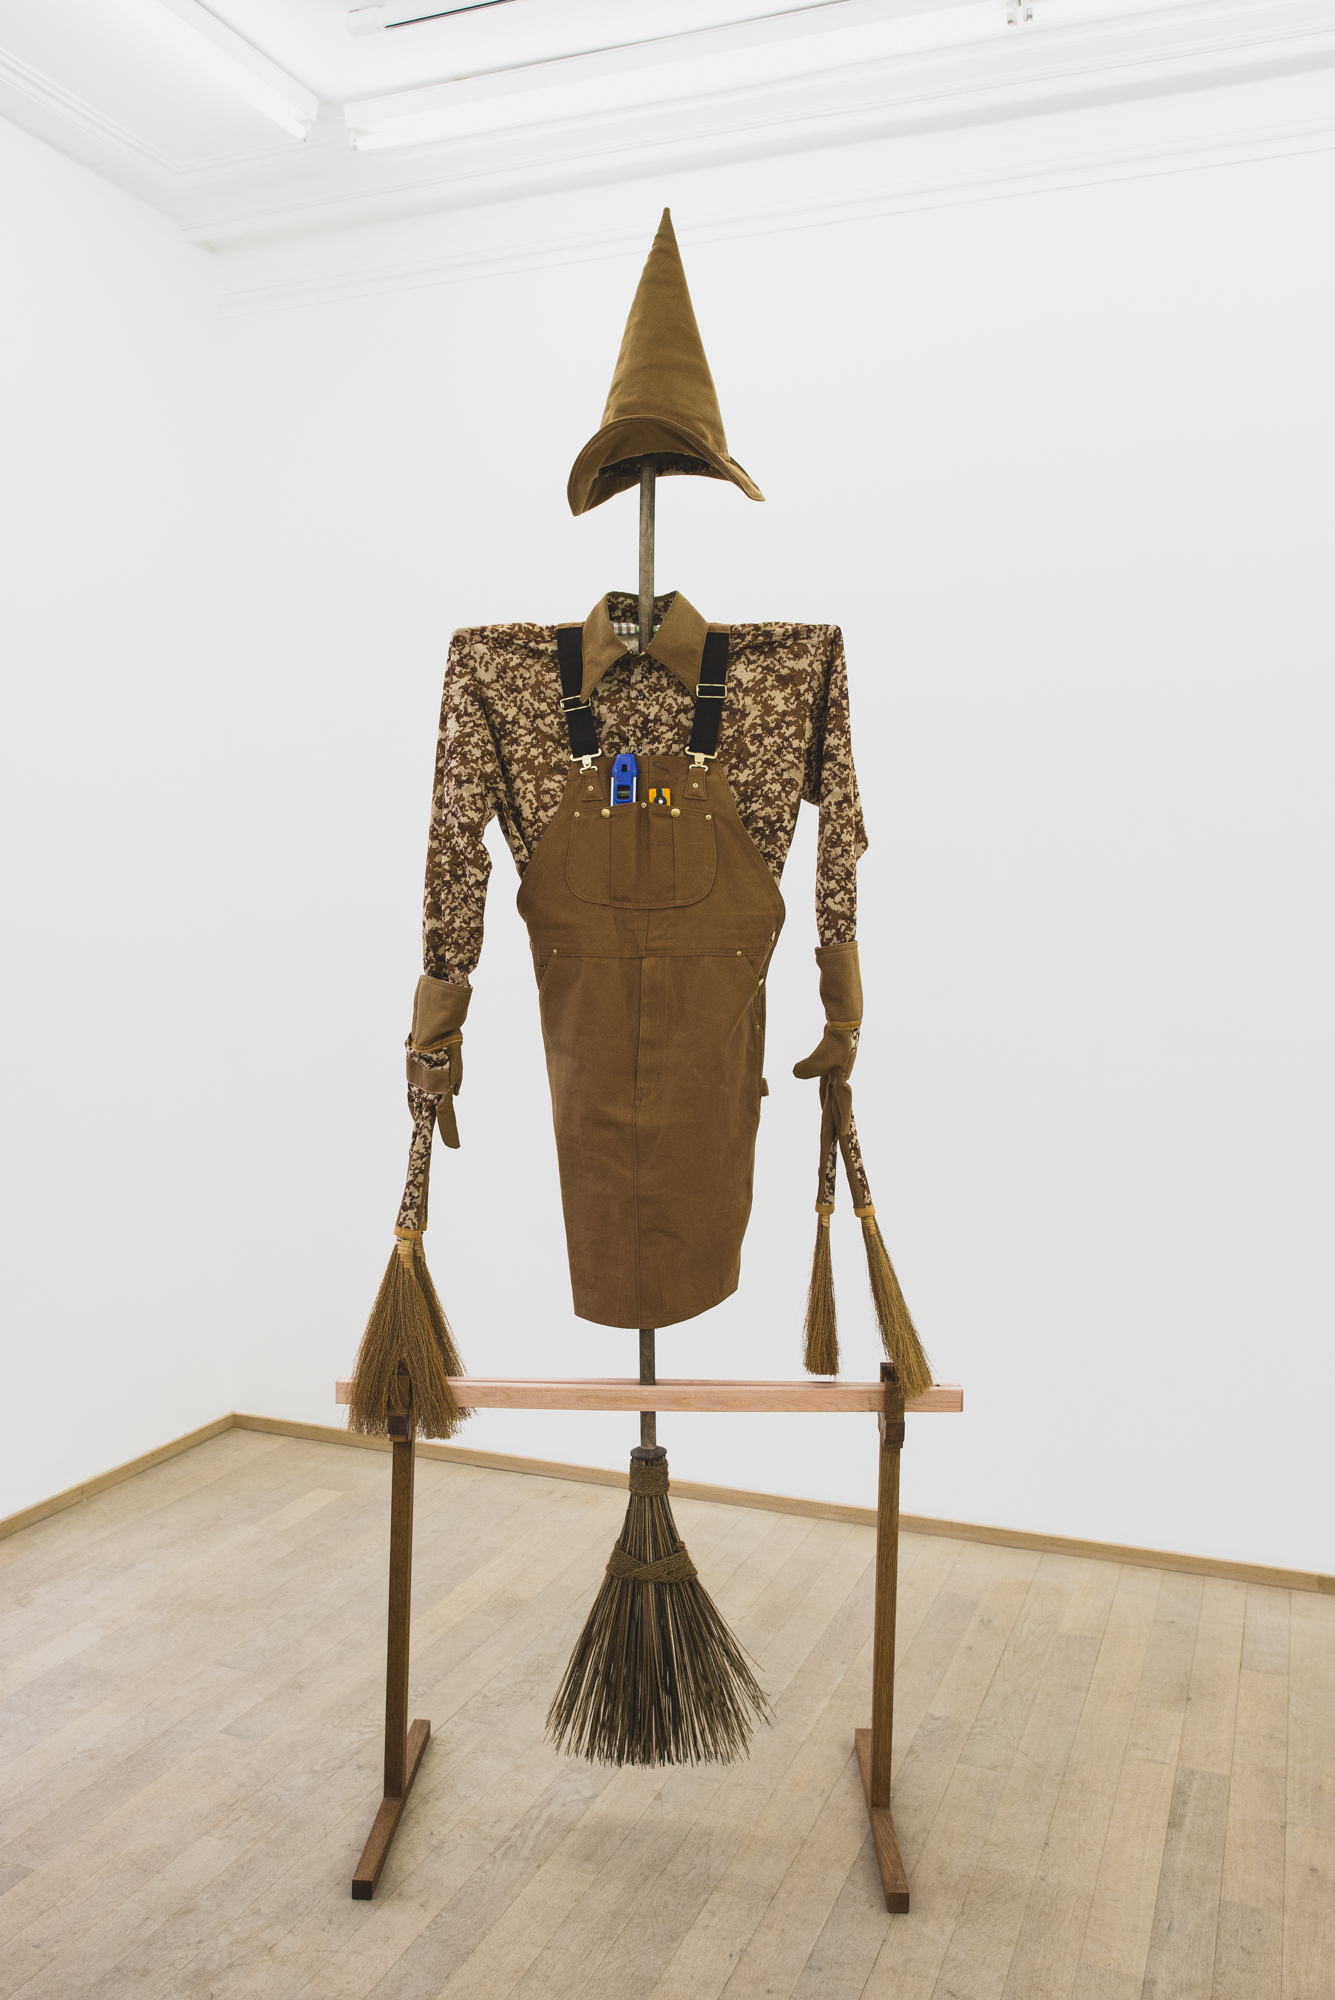 Mike Bourscheid - The wicked scarecrow, 2020